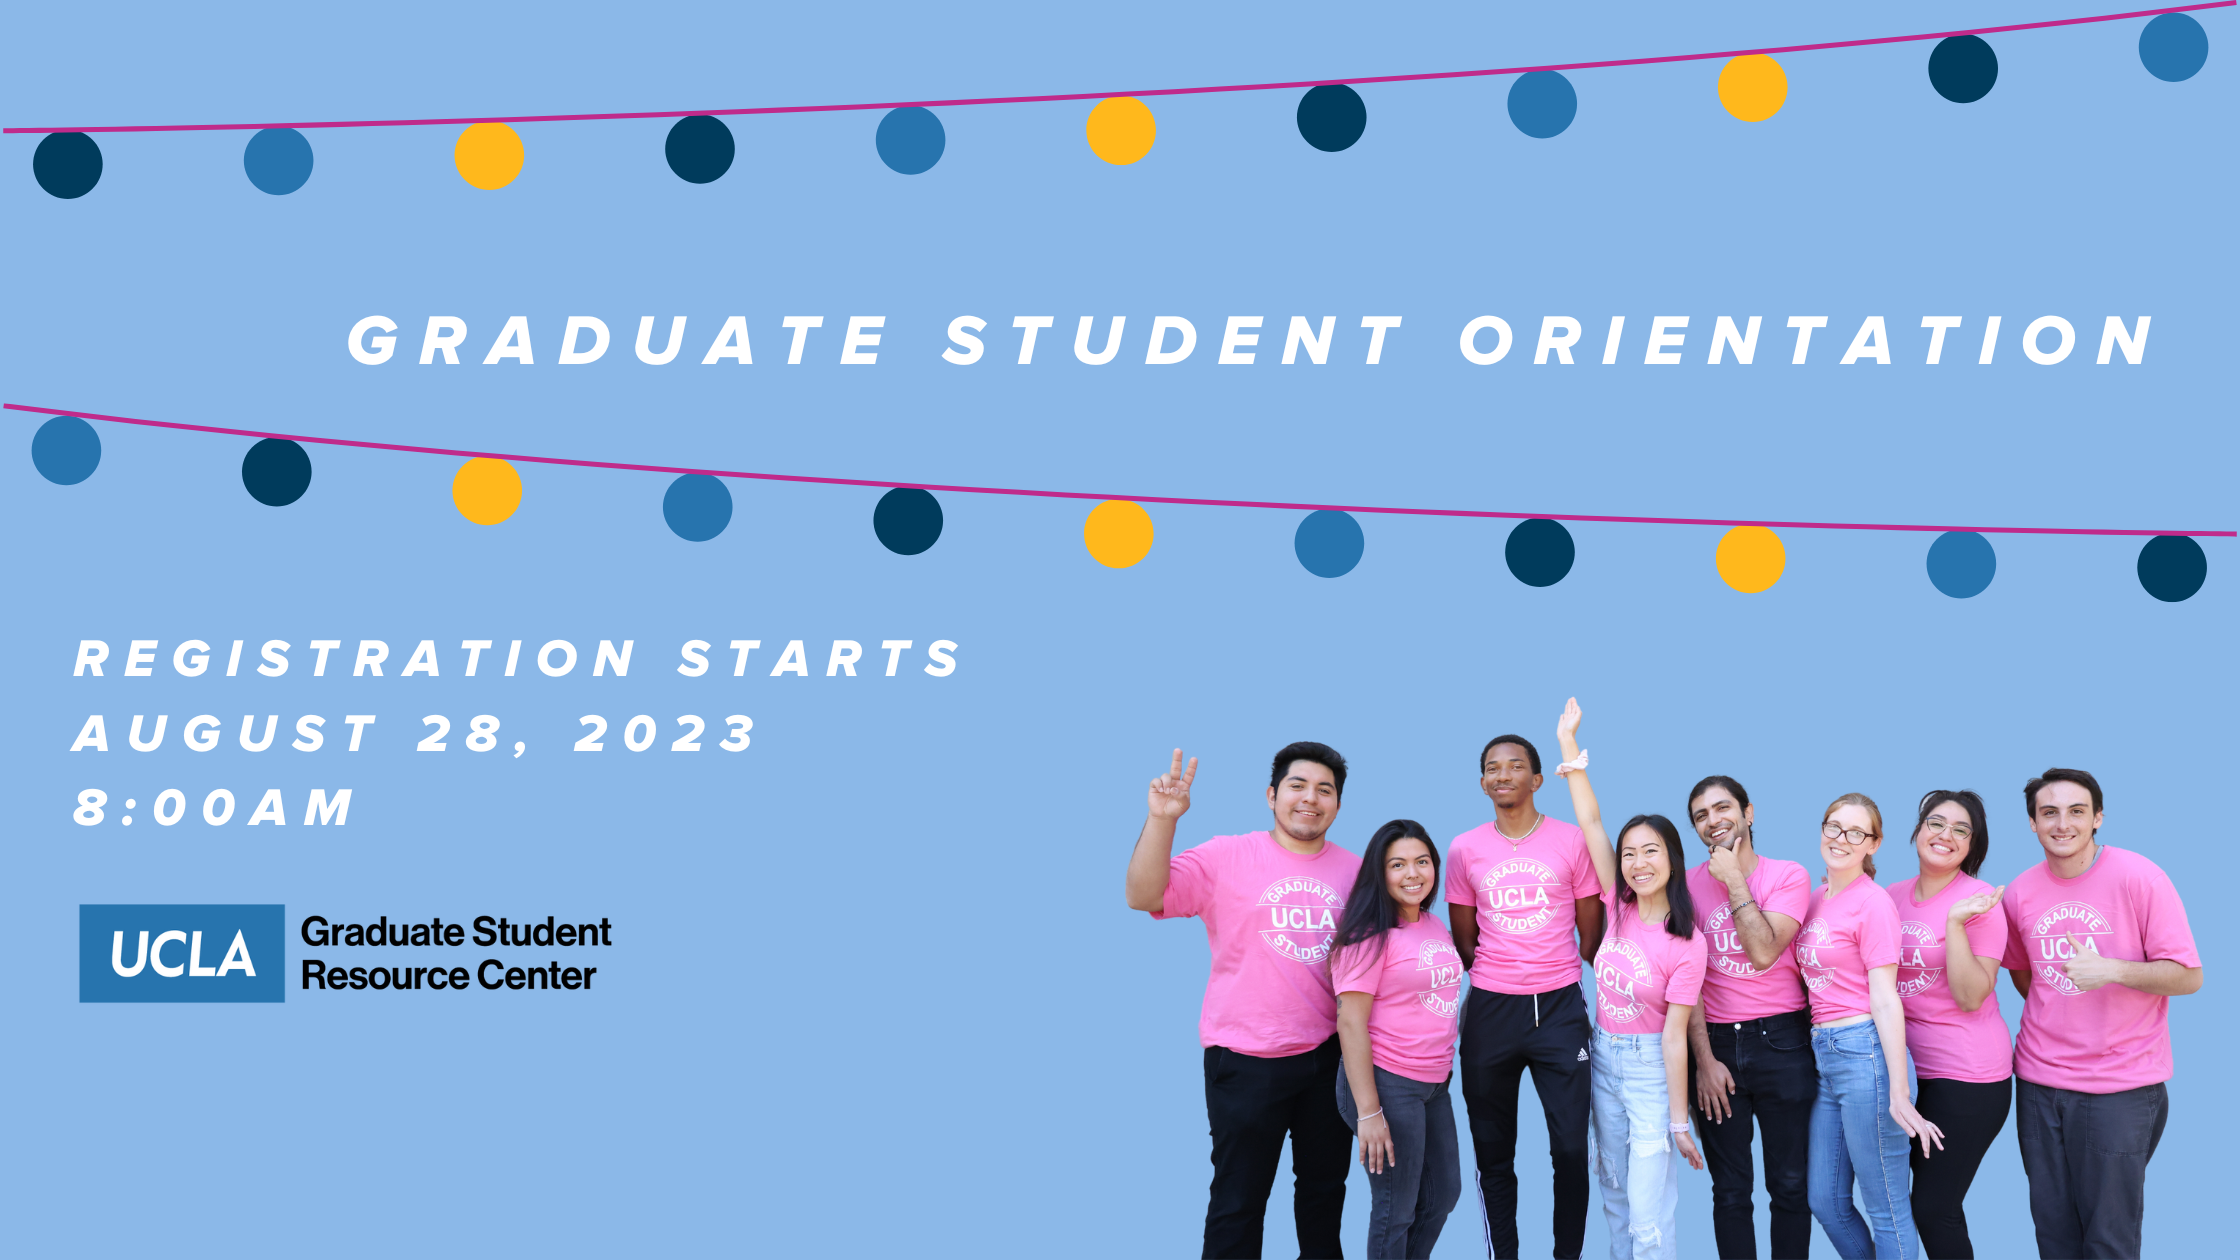 Graduate student orientation header with registration date of August 28 at 8:00 am